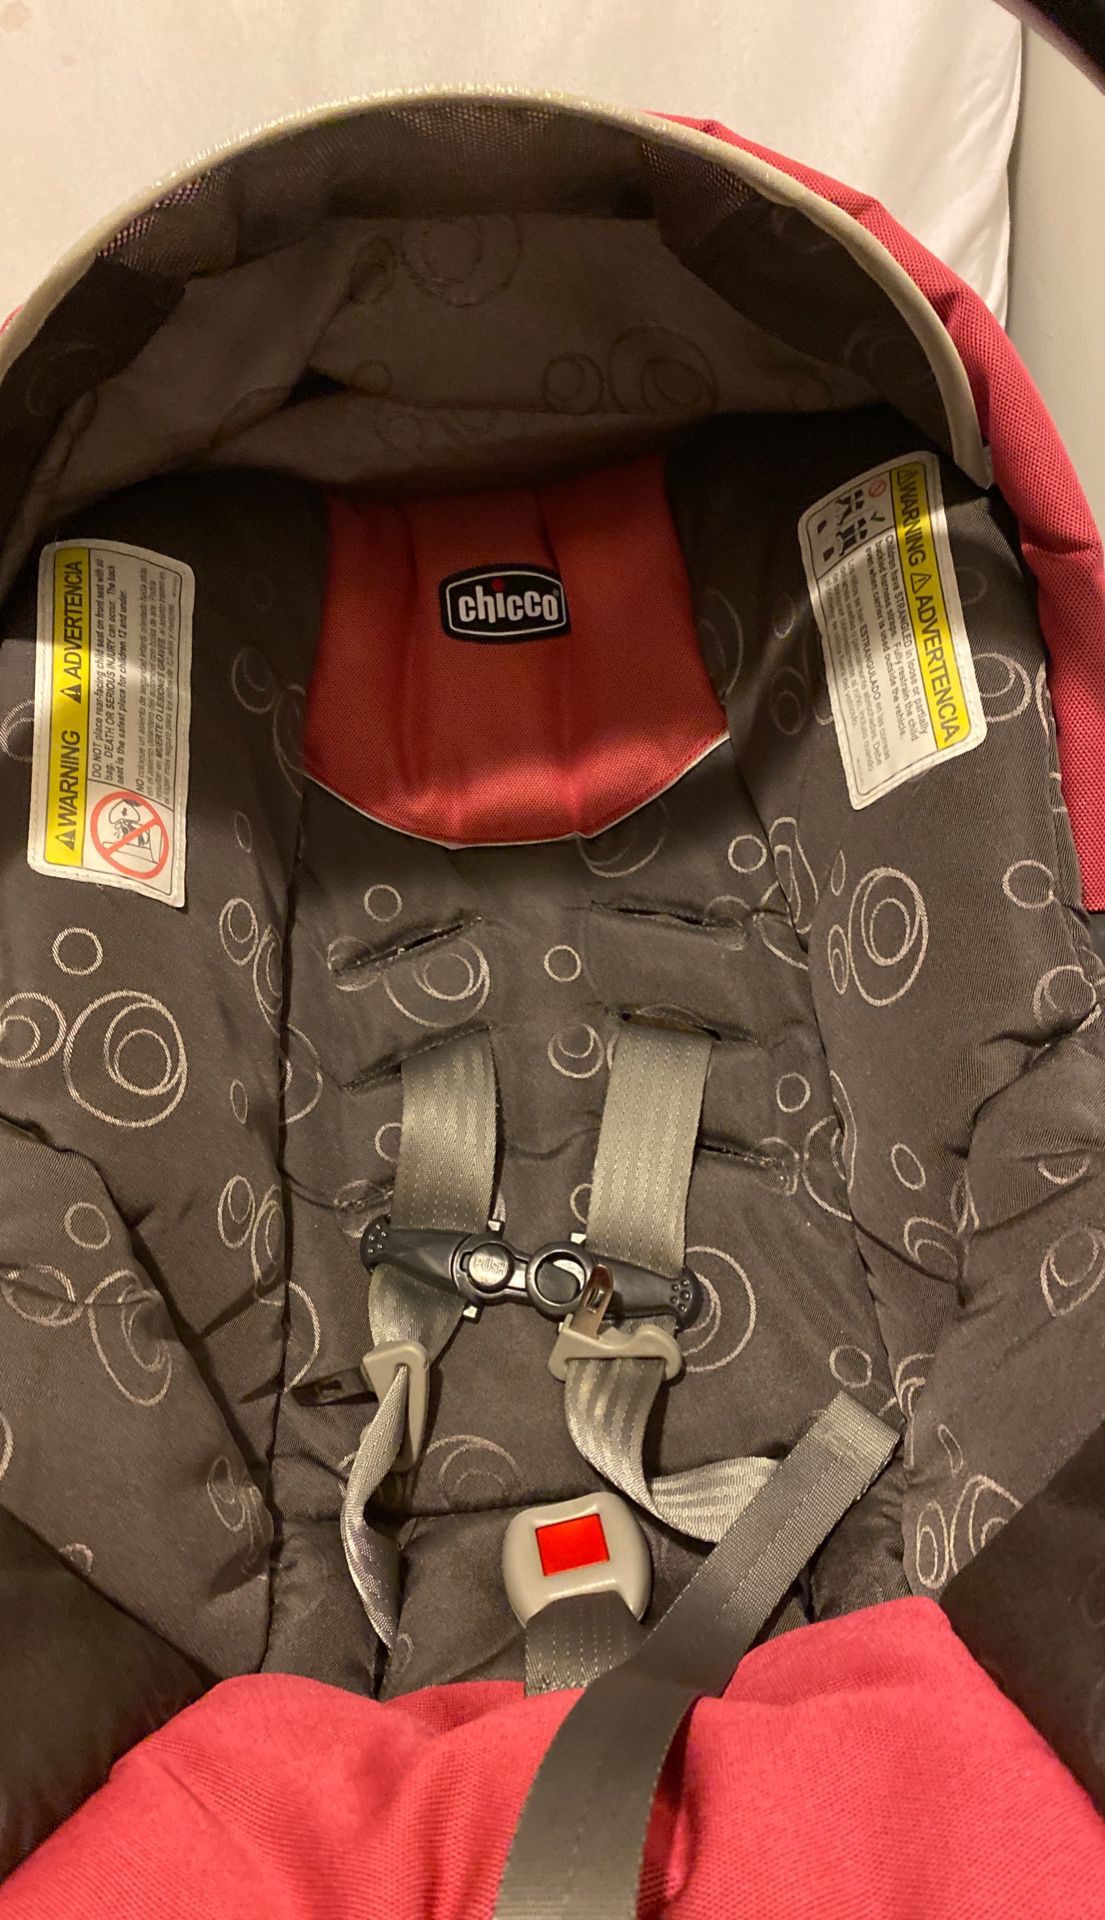 Chicco carseat